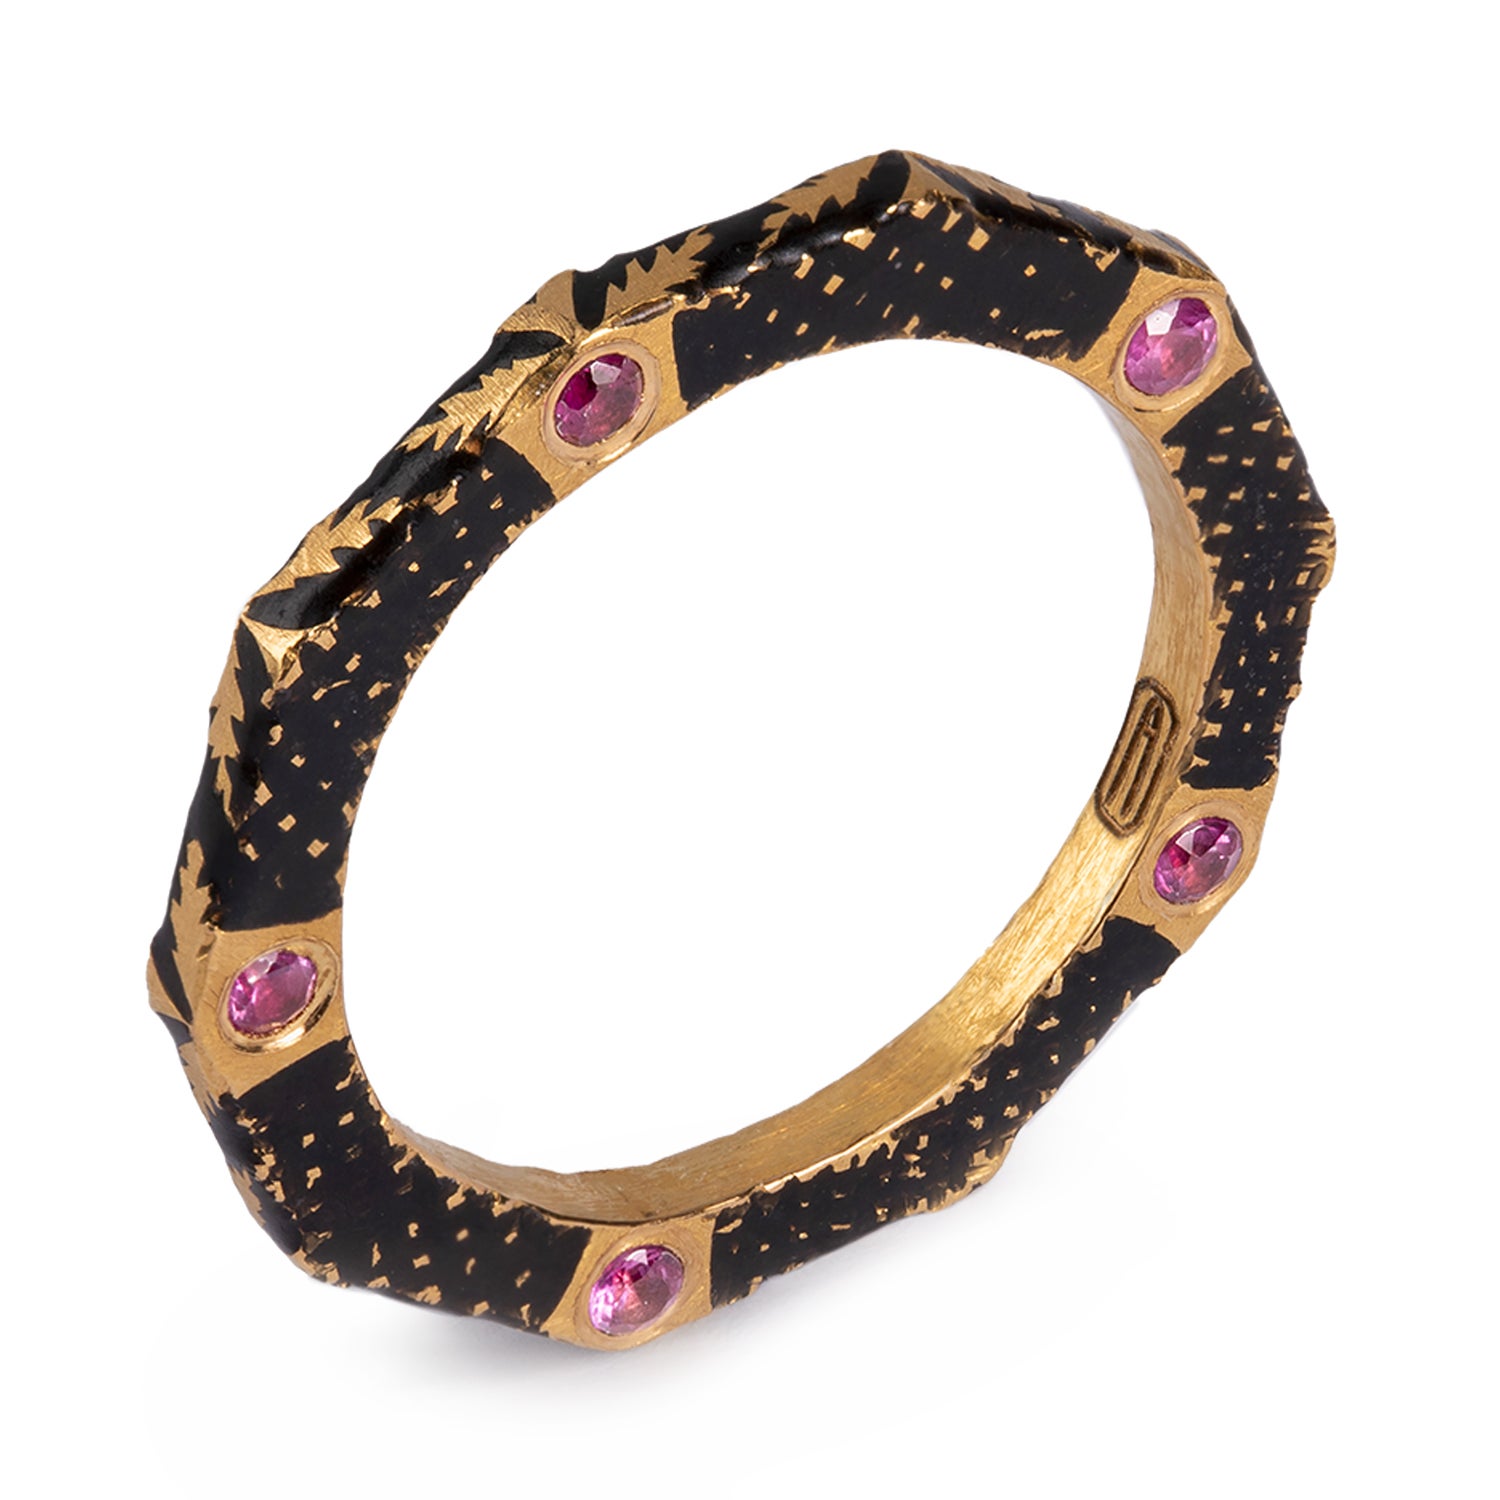 22K Gold Handmade Decagon Shaped Black Enamel Band Ring with Sapphires by Agaro For Sale